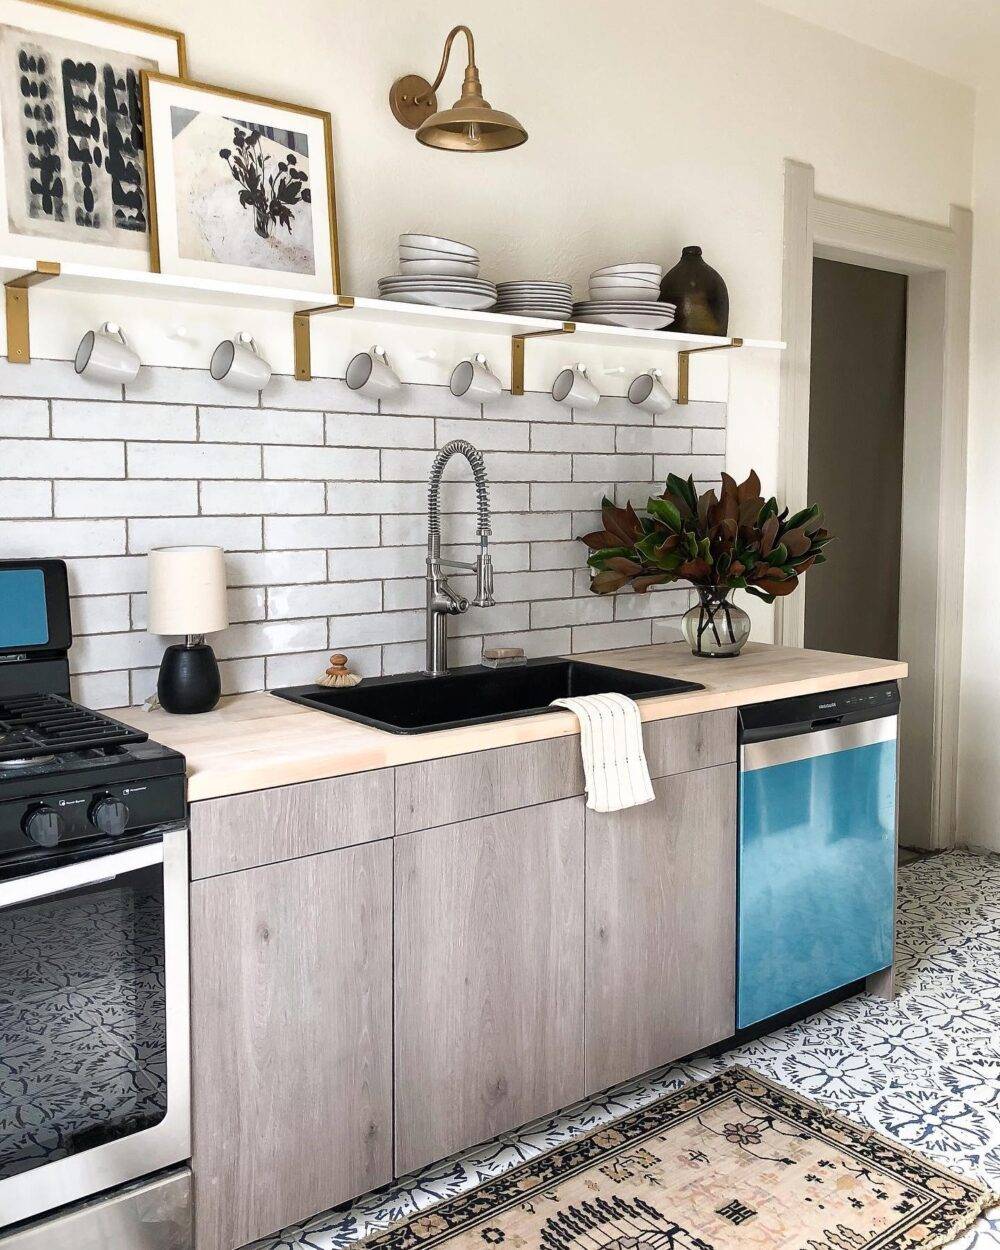 This small kitchen features a white handmade-look subway tile backsplash and boho-inspired patterned tile floor. 